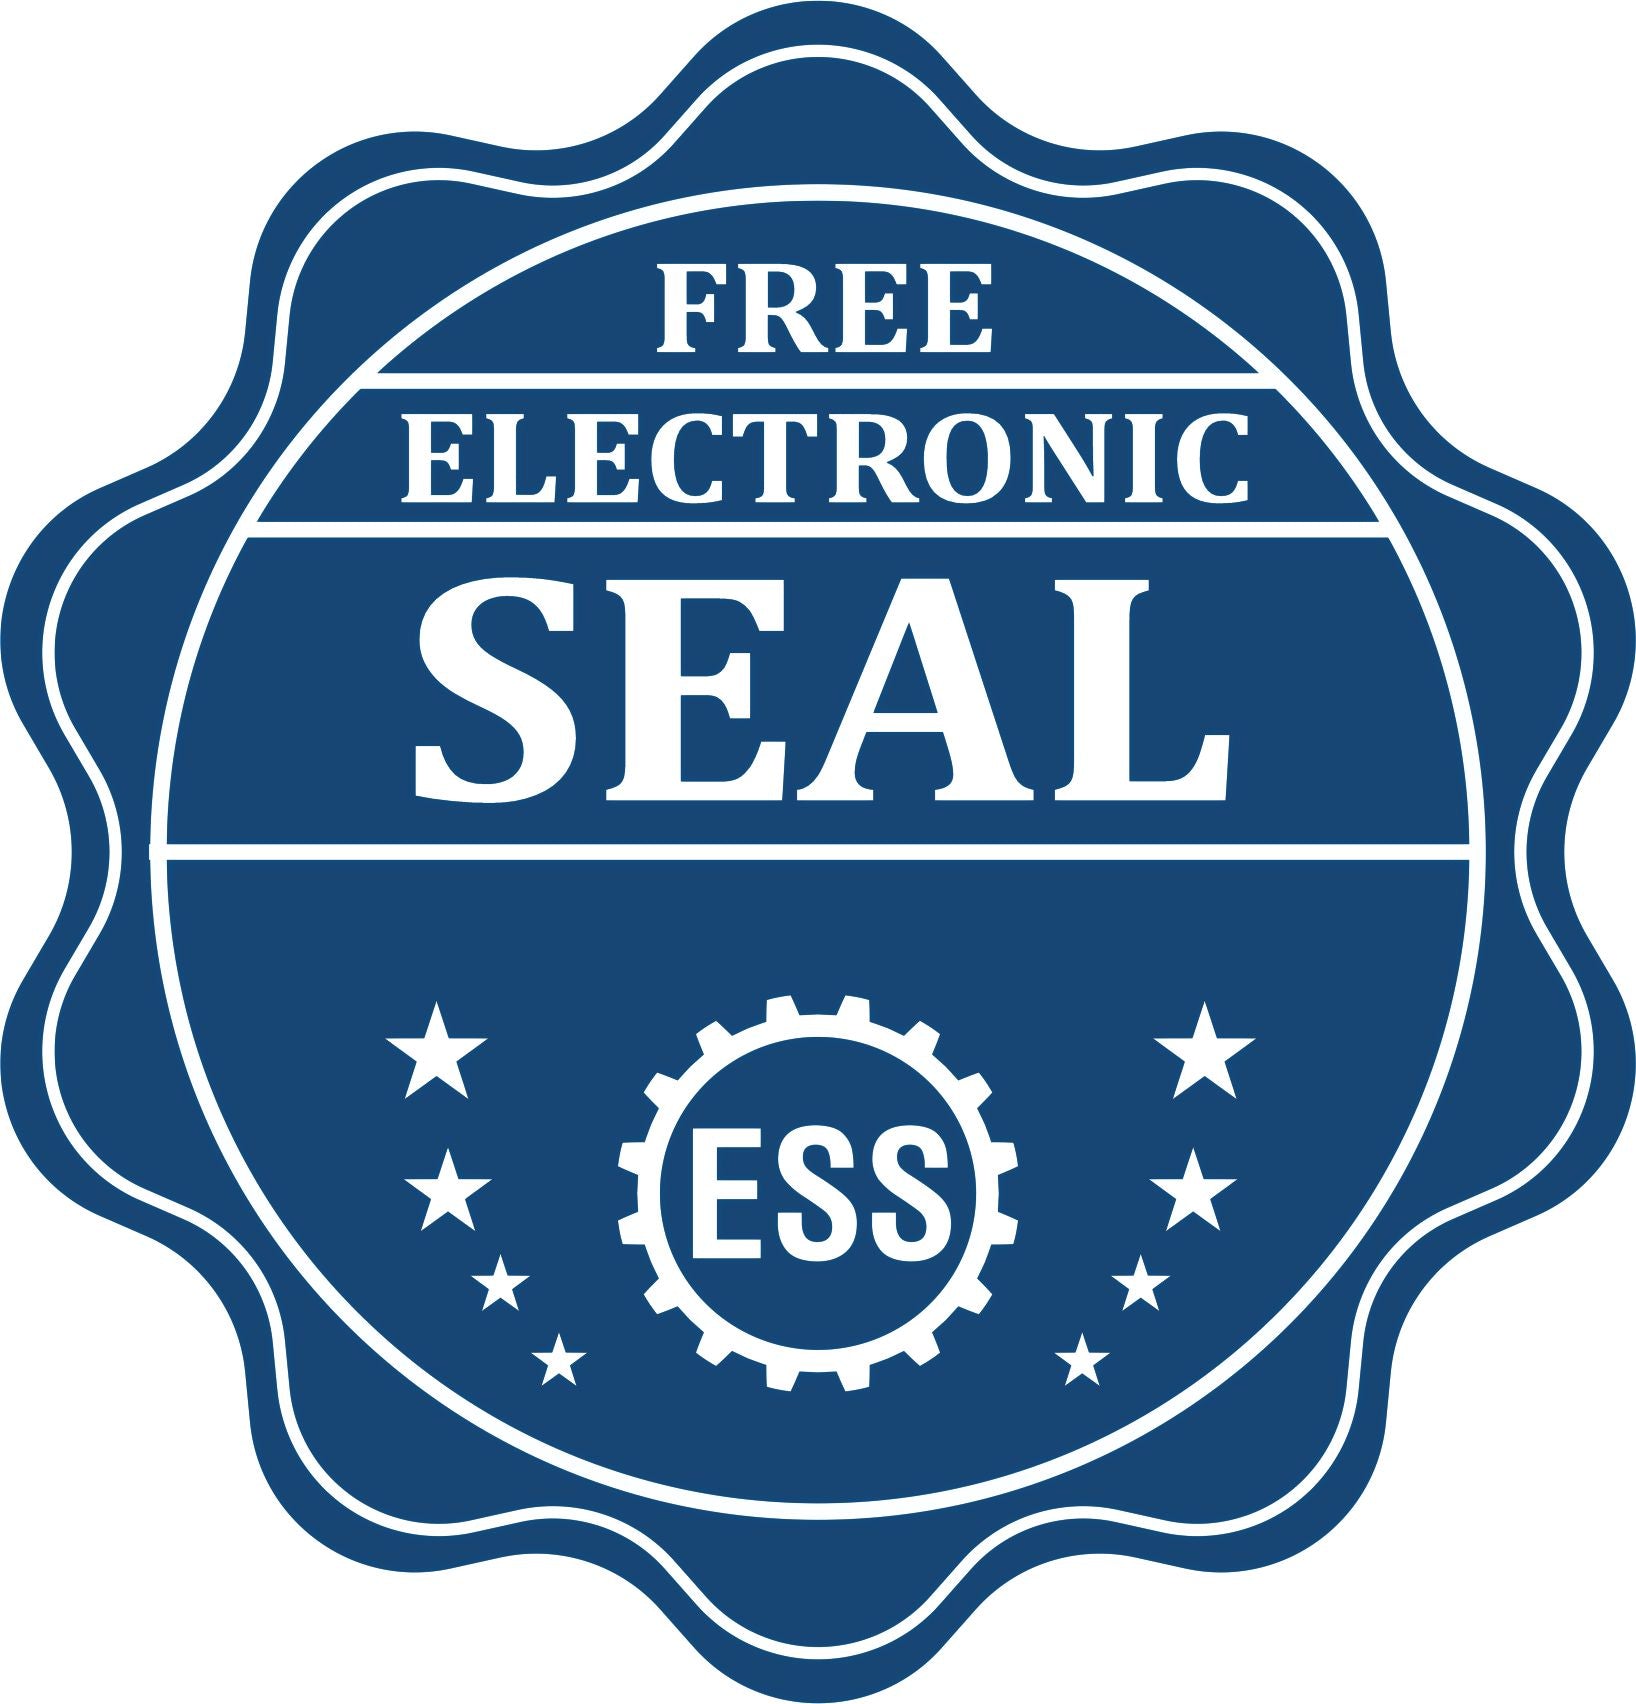 A badge showing a free electronic seal for the Gift Connecticut Landscape Architect Seal with stars and the ESS gear on the emblem.